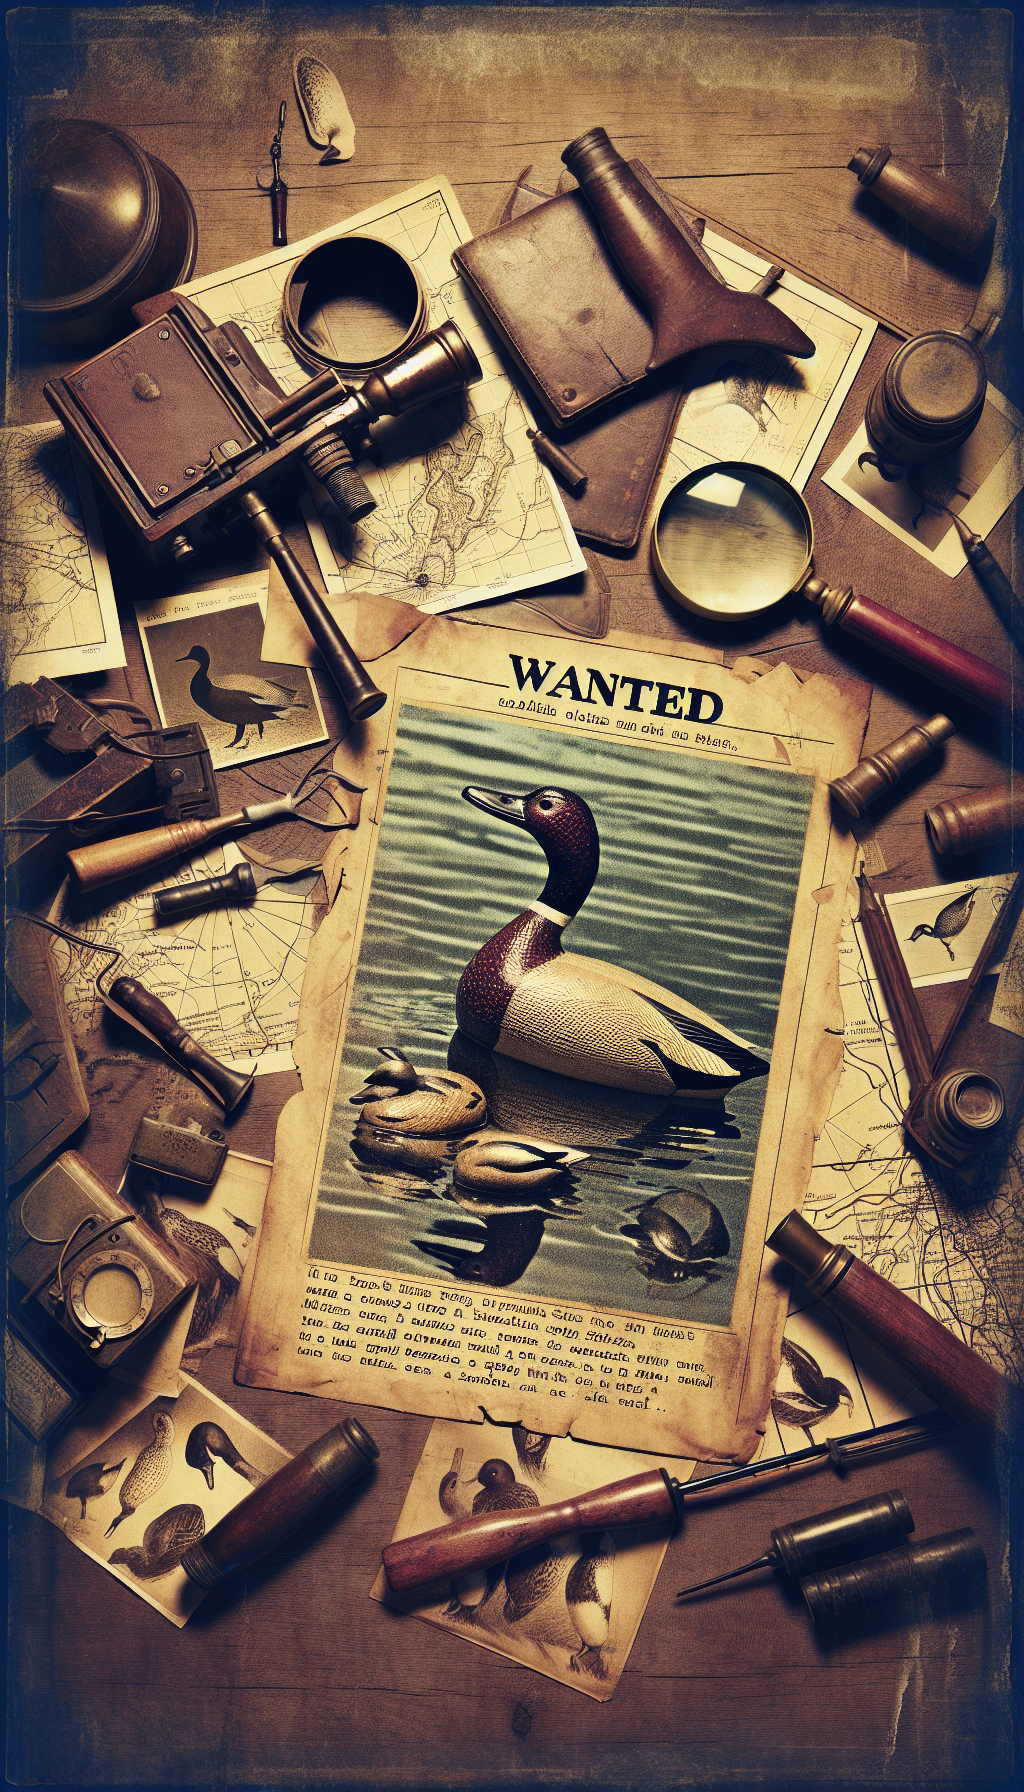 A sepia-toned detective's desk, cluttered with faded photographs and maps of famous waterfowl migration routes, with a magnifying glass hovering over a historically significant duck decoy. Part of the image transitions into a vibrant 'Wanted' poster featuring a sketch of the most sought-after antique decoy, blending nostalgia and urgency in the quest for identification.